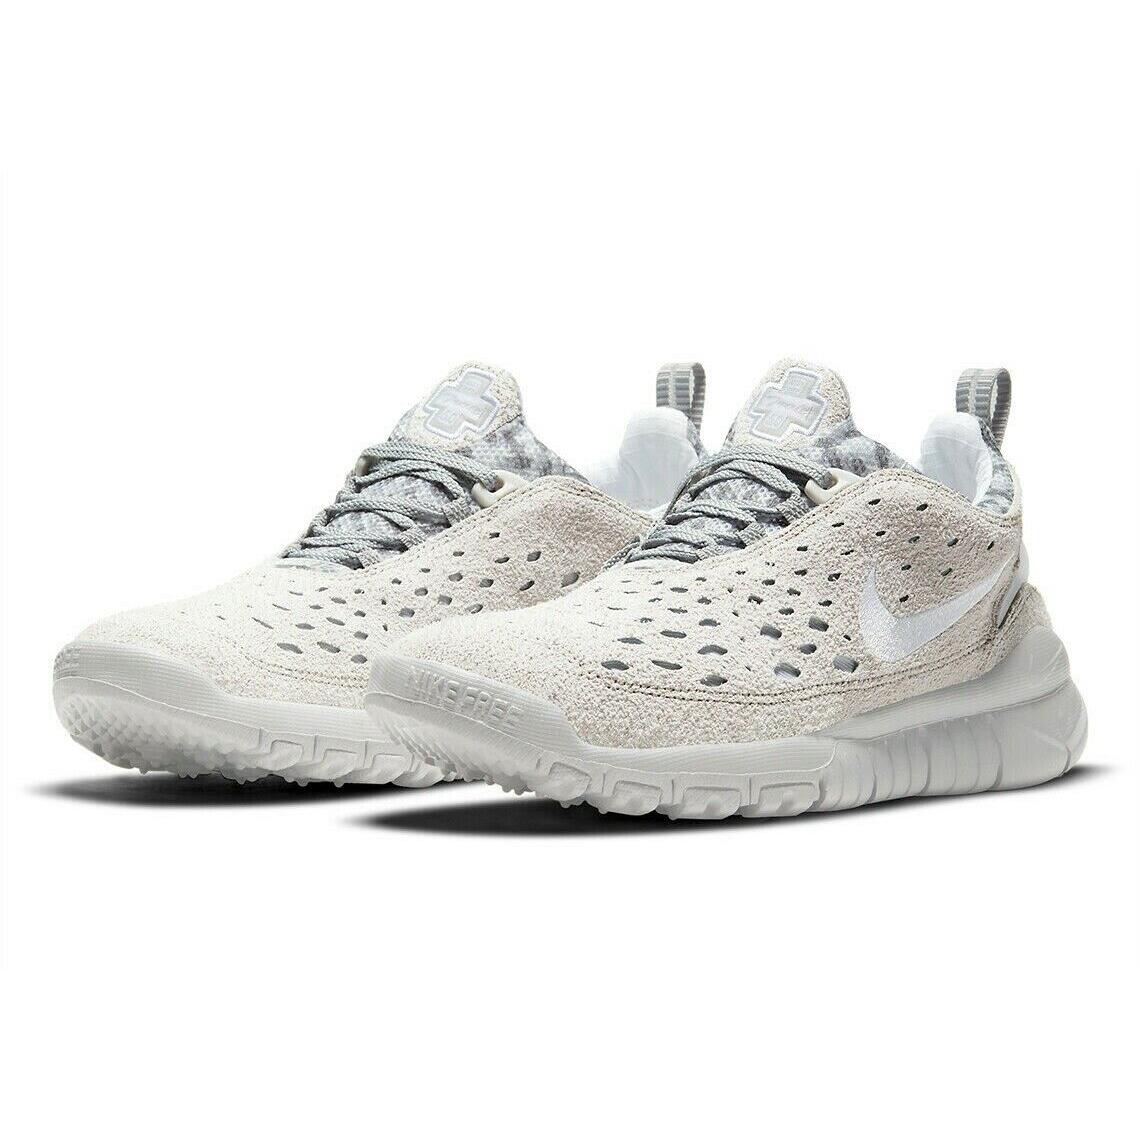 Nike Free Run Trail Womens Size 9.5 Sneakers Shoes CW5814 002 Neutral Gray